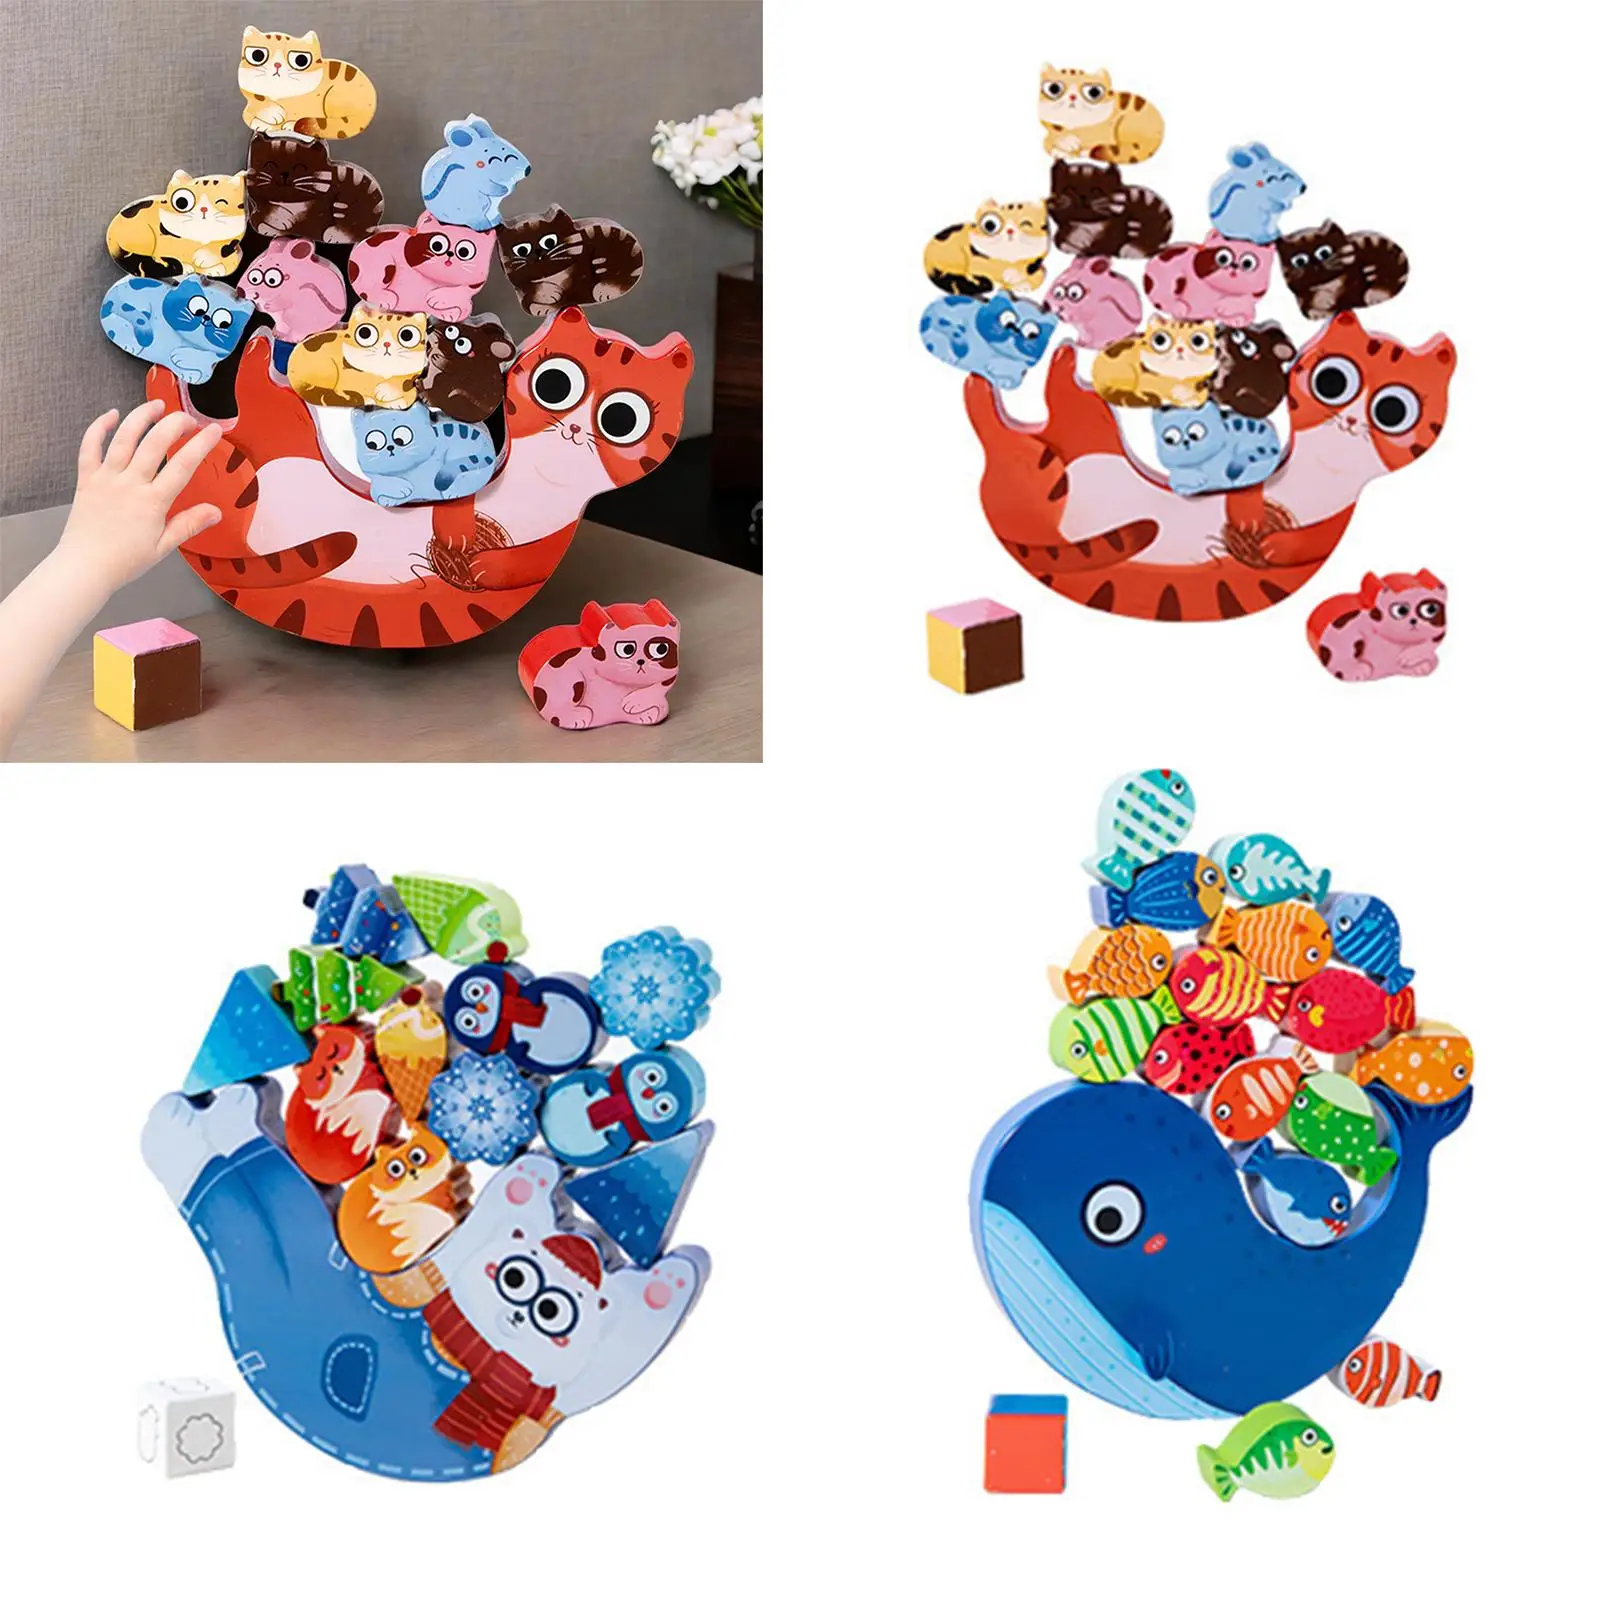 Montessori Toys Stacking Building Blocks Sorting Skill Developing Intelligence Play for Babies Kids Toddlers Birthday Gift